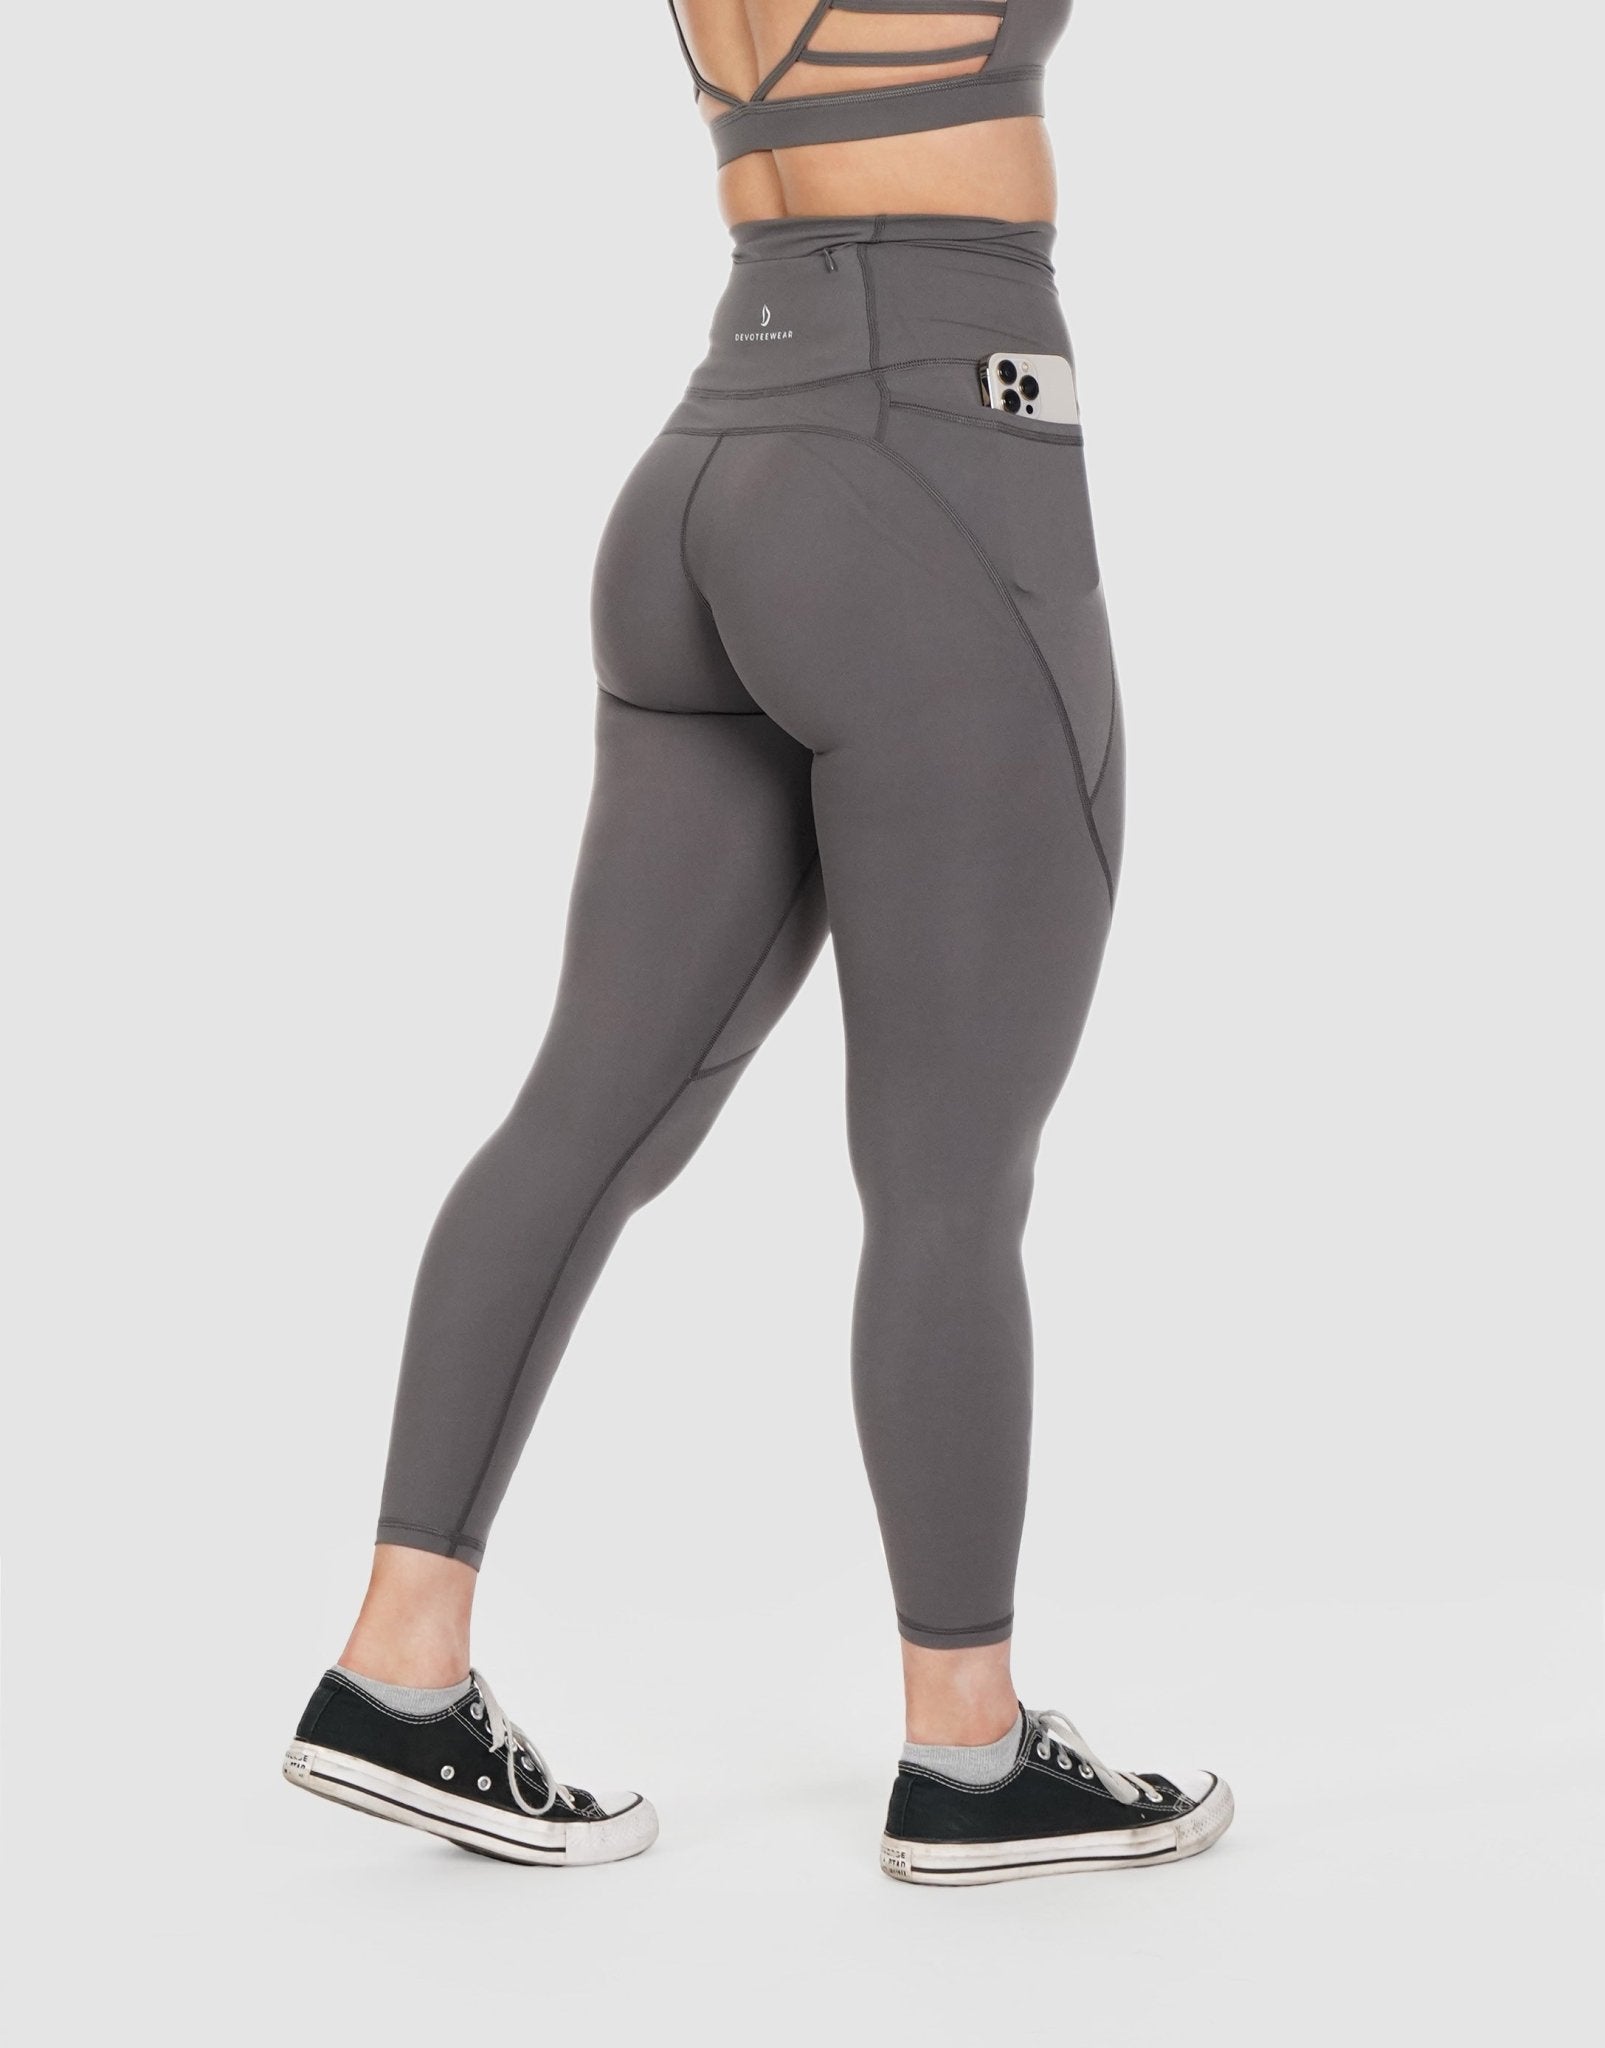 Women Solid Workout Leggings with Deep Side Pocket – The Dance Bible